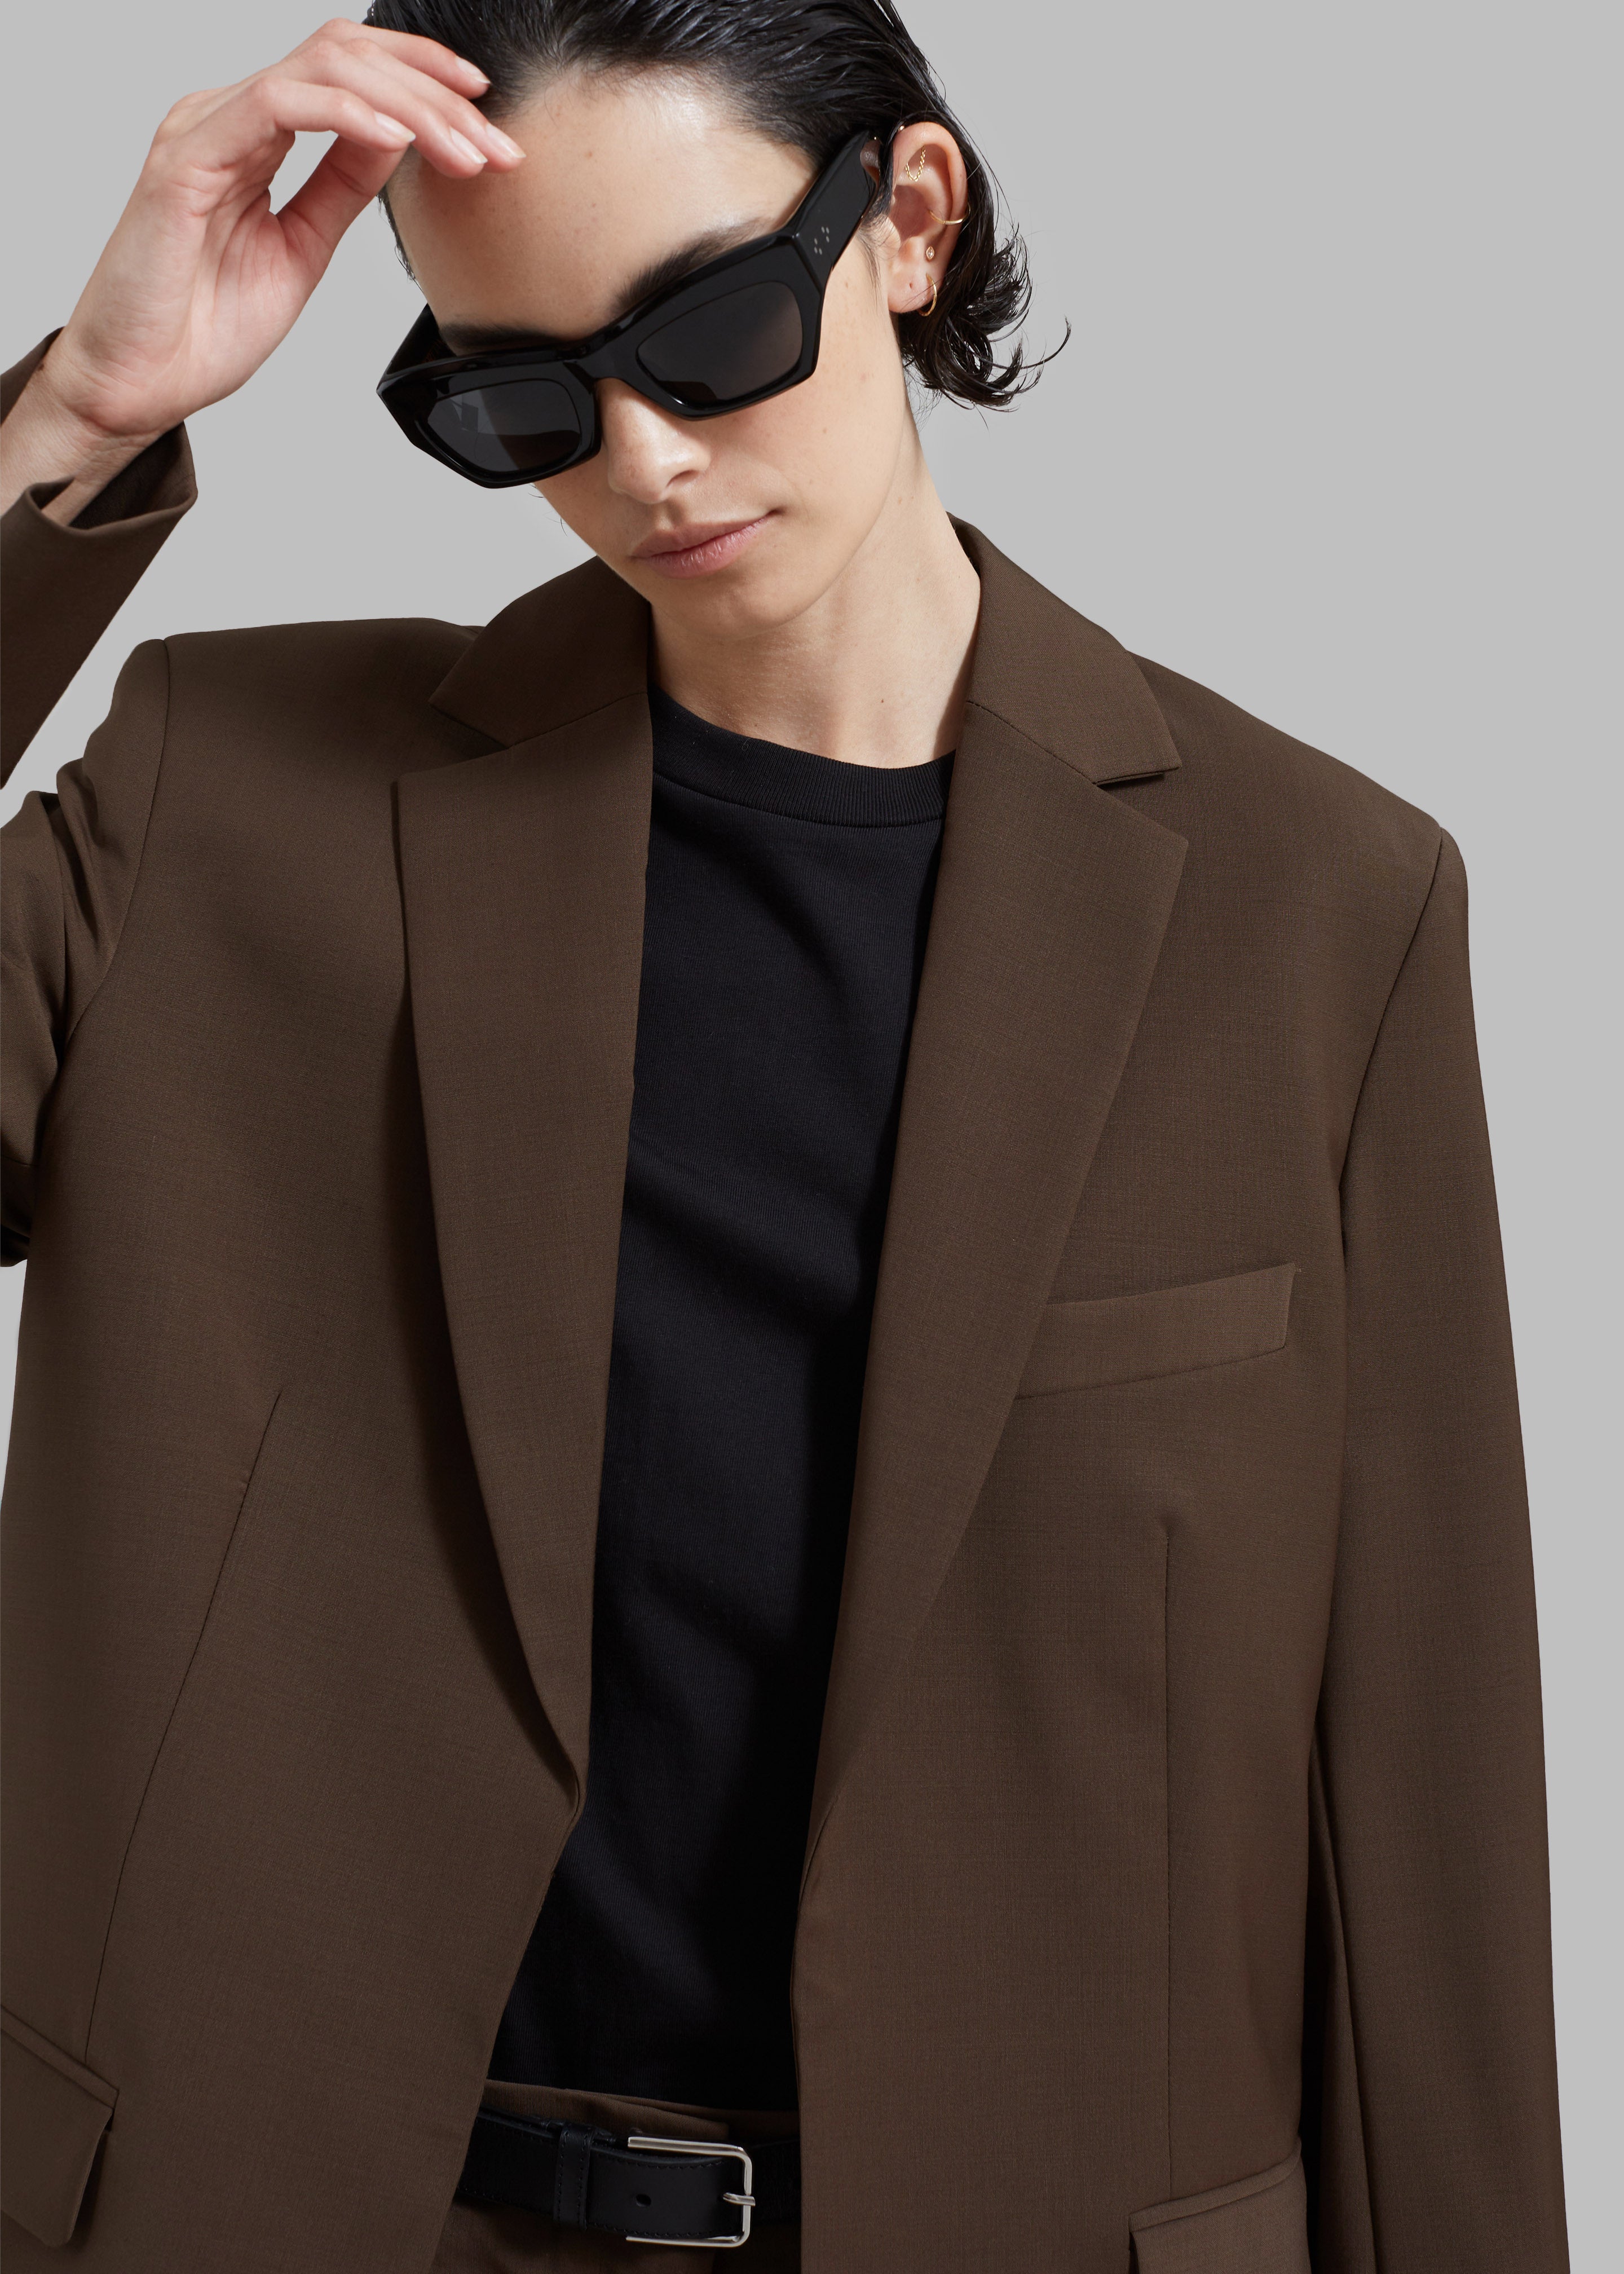 Matteau Relaxed Tailored Blazer - Coffee - 5